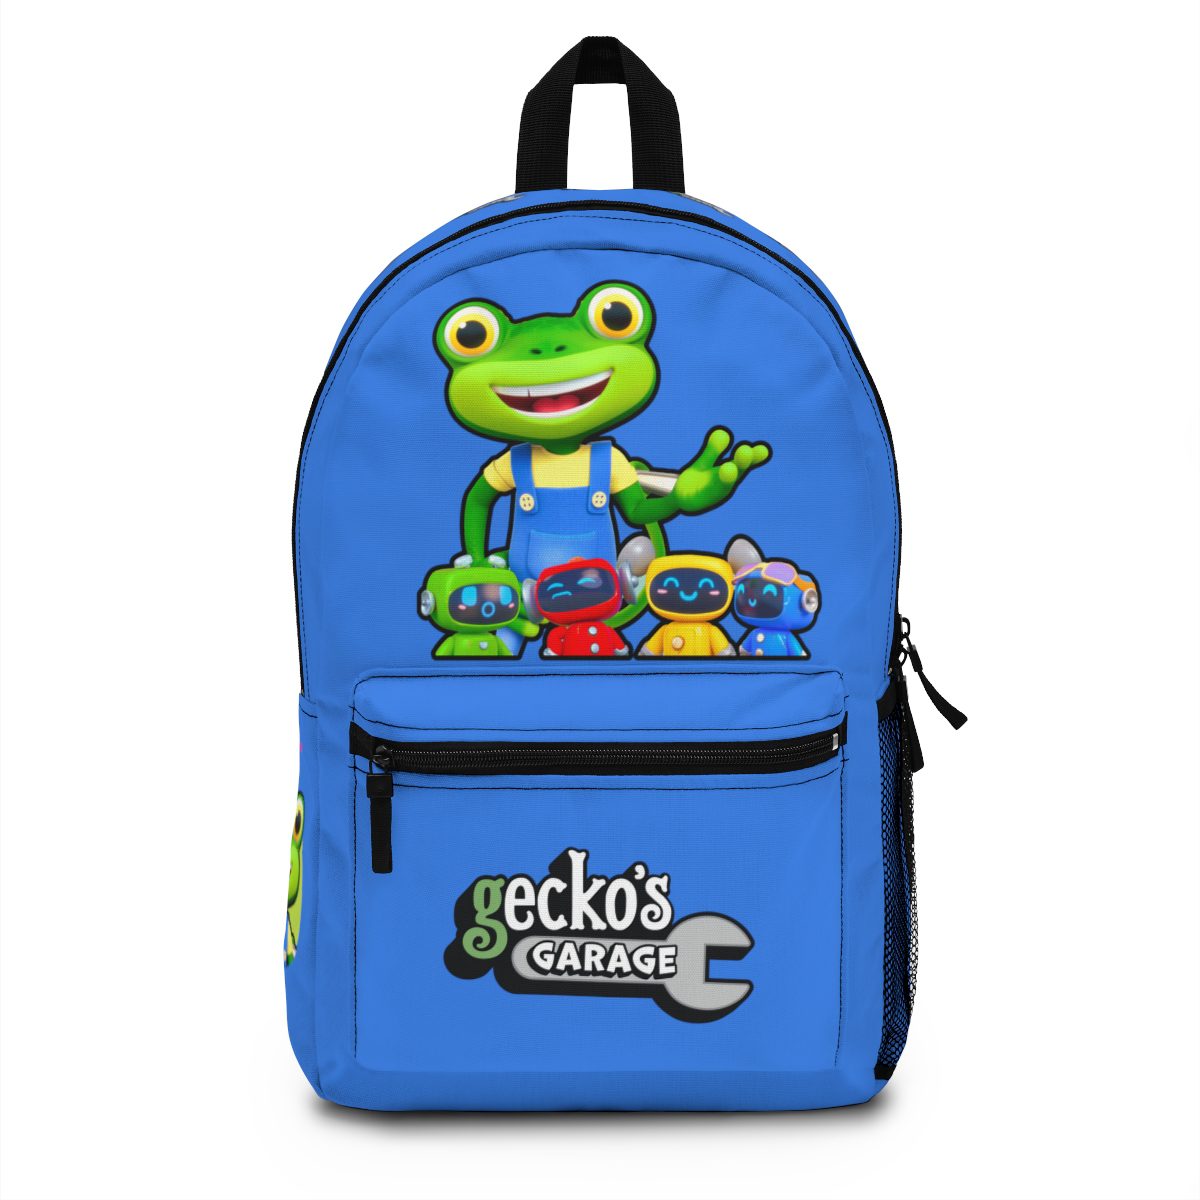 Blue Gecko’s Garage Animated Series Backpack – Adorable and Fun Cool Kiddo